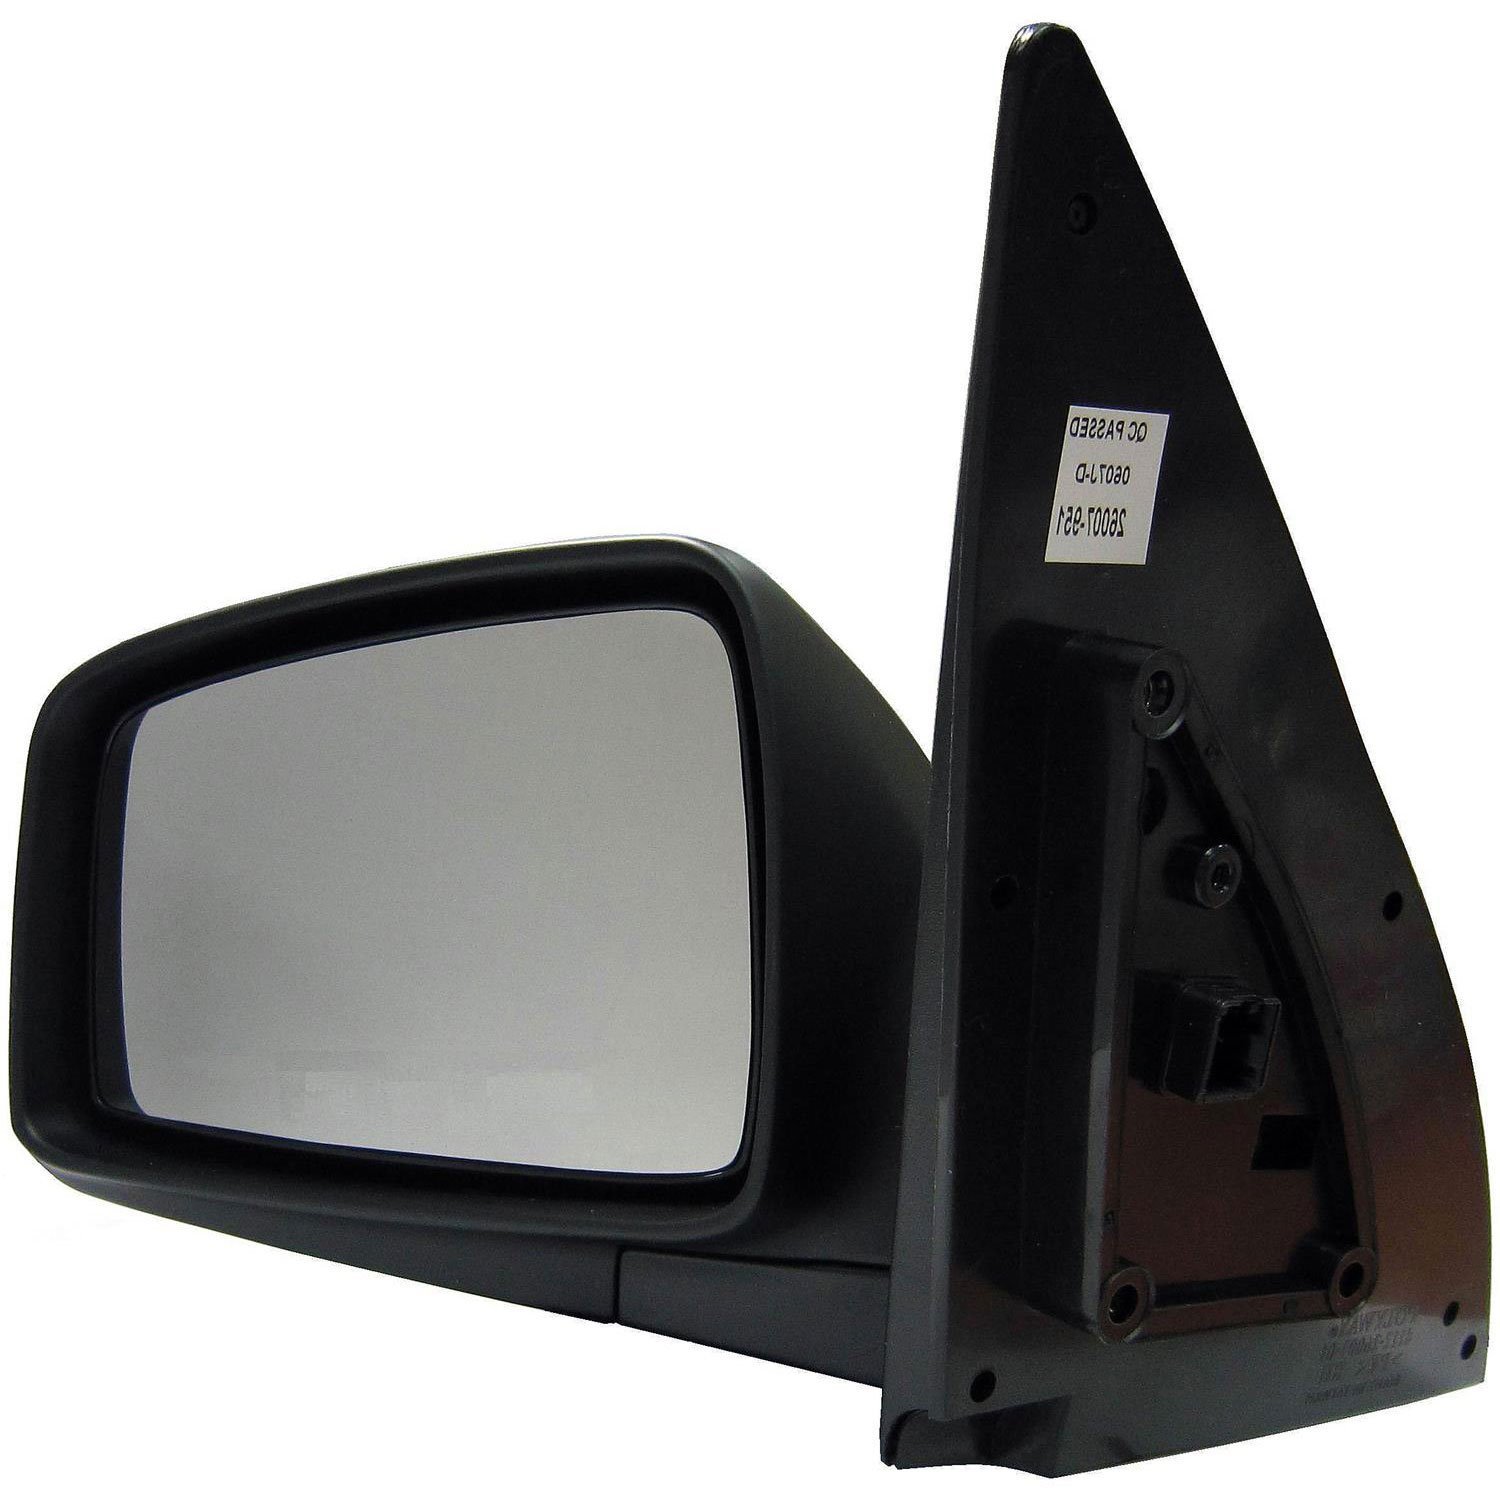 Side View Mirror Left Power Heated